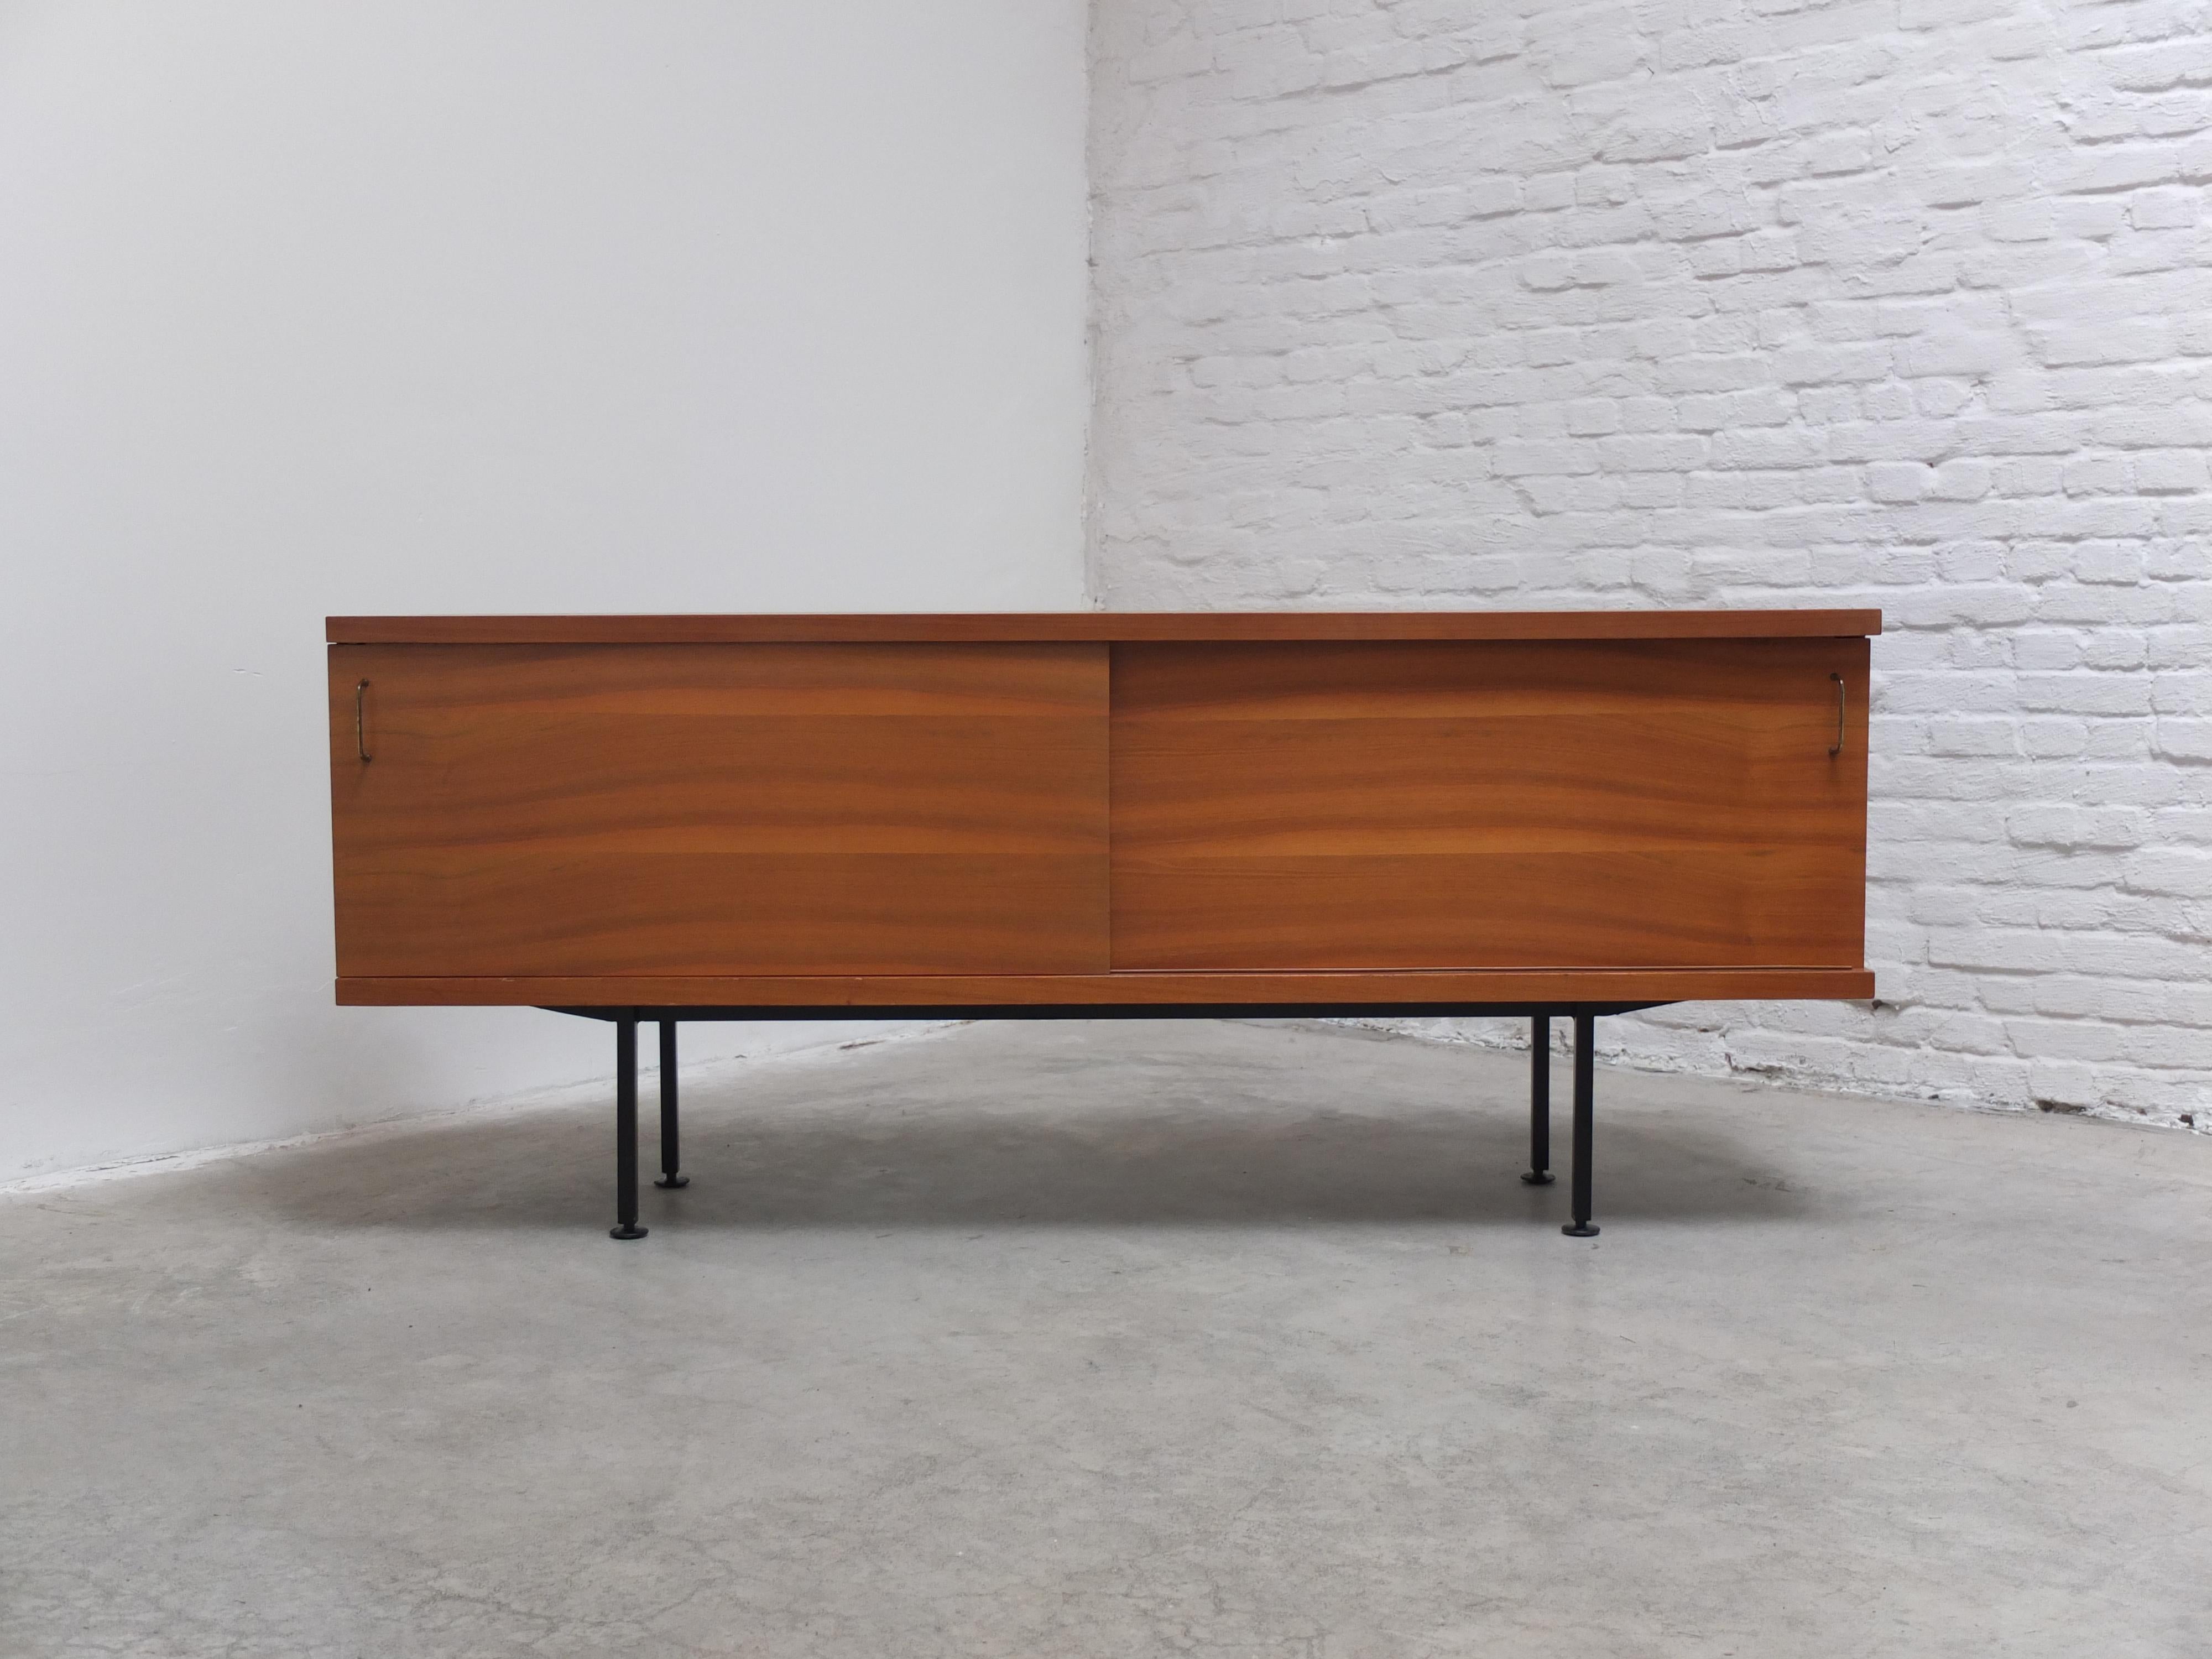 Stunning sideboard designed by Jos De Mey for Luxus (Kortrijk) during the 1950s. These early fifties designs by De Mey are very hard to find and much less known than his work for Van Den Berghe-Pauvers. It’s only the second time that I could find